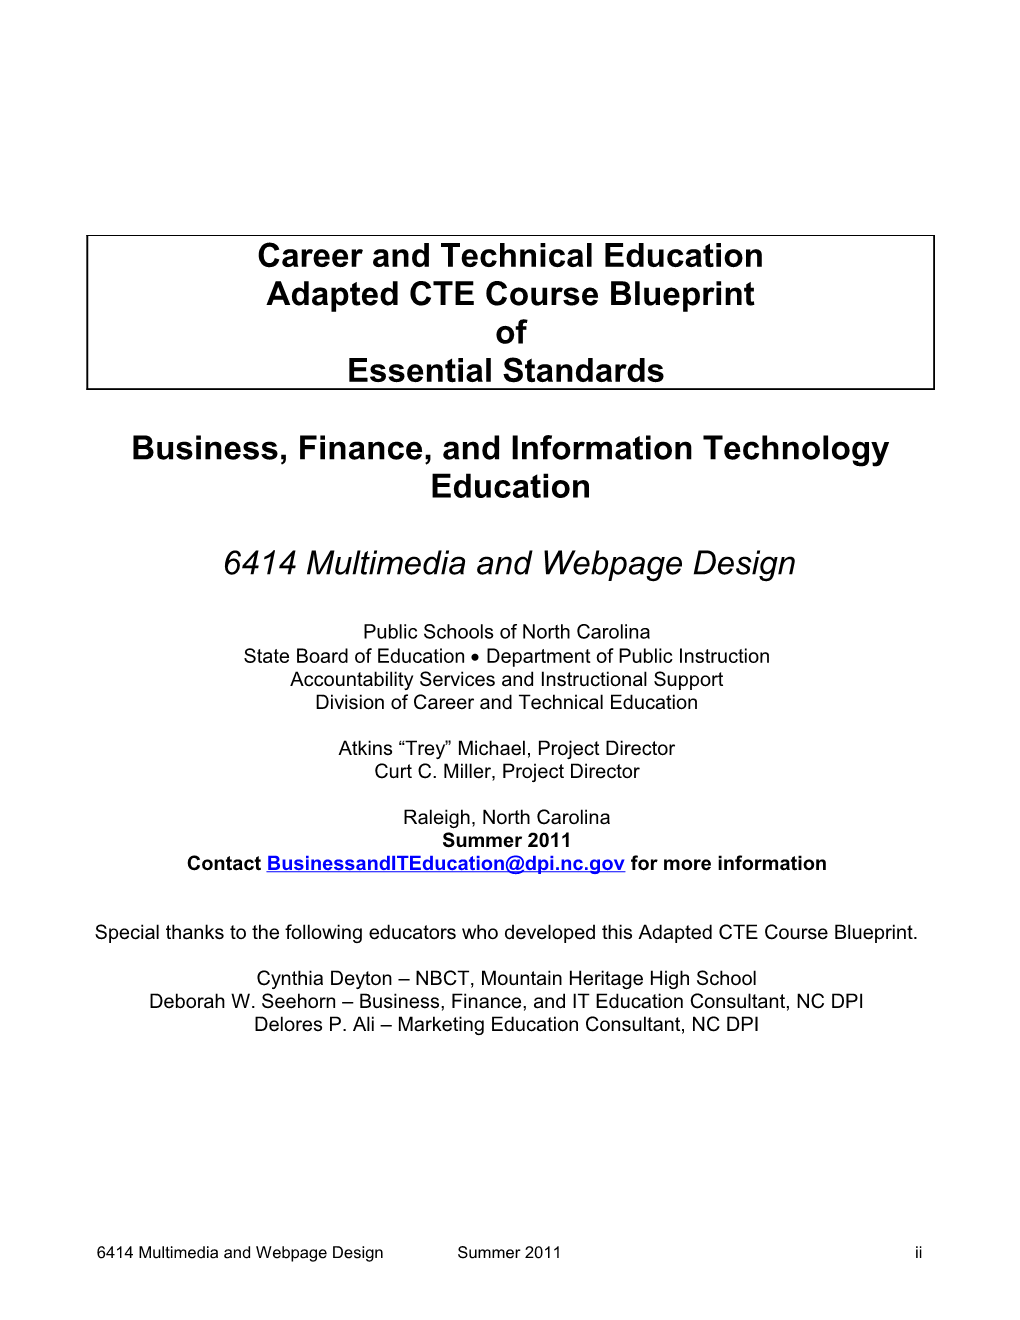 Business, Finance, and Information Technology Education